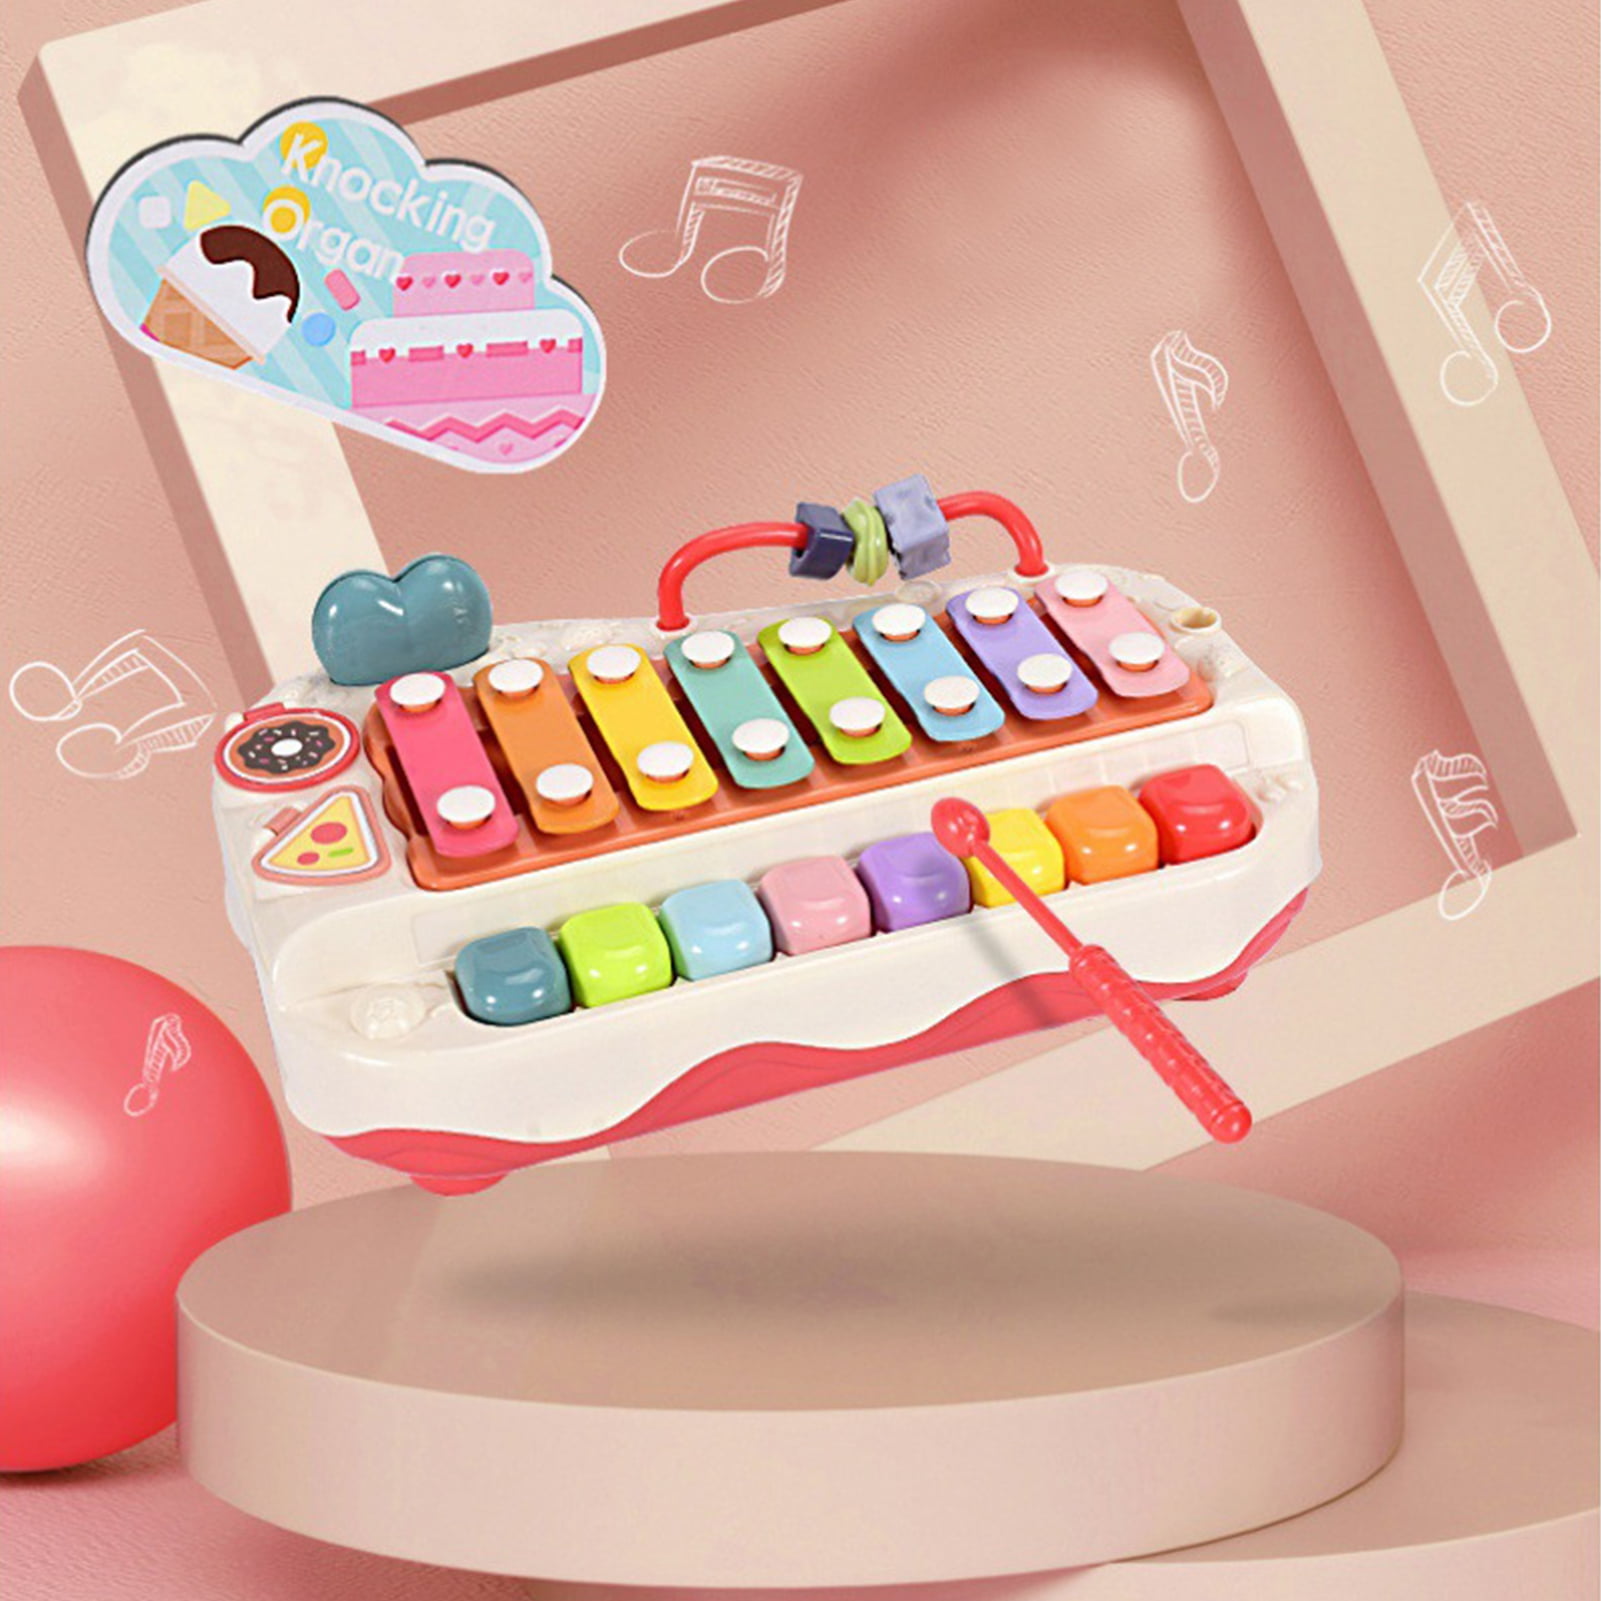 Baby Entertainment Toy 2-in-1 Baby Xylophone Toy Sounds Hand-eye